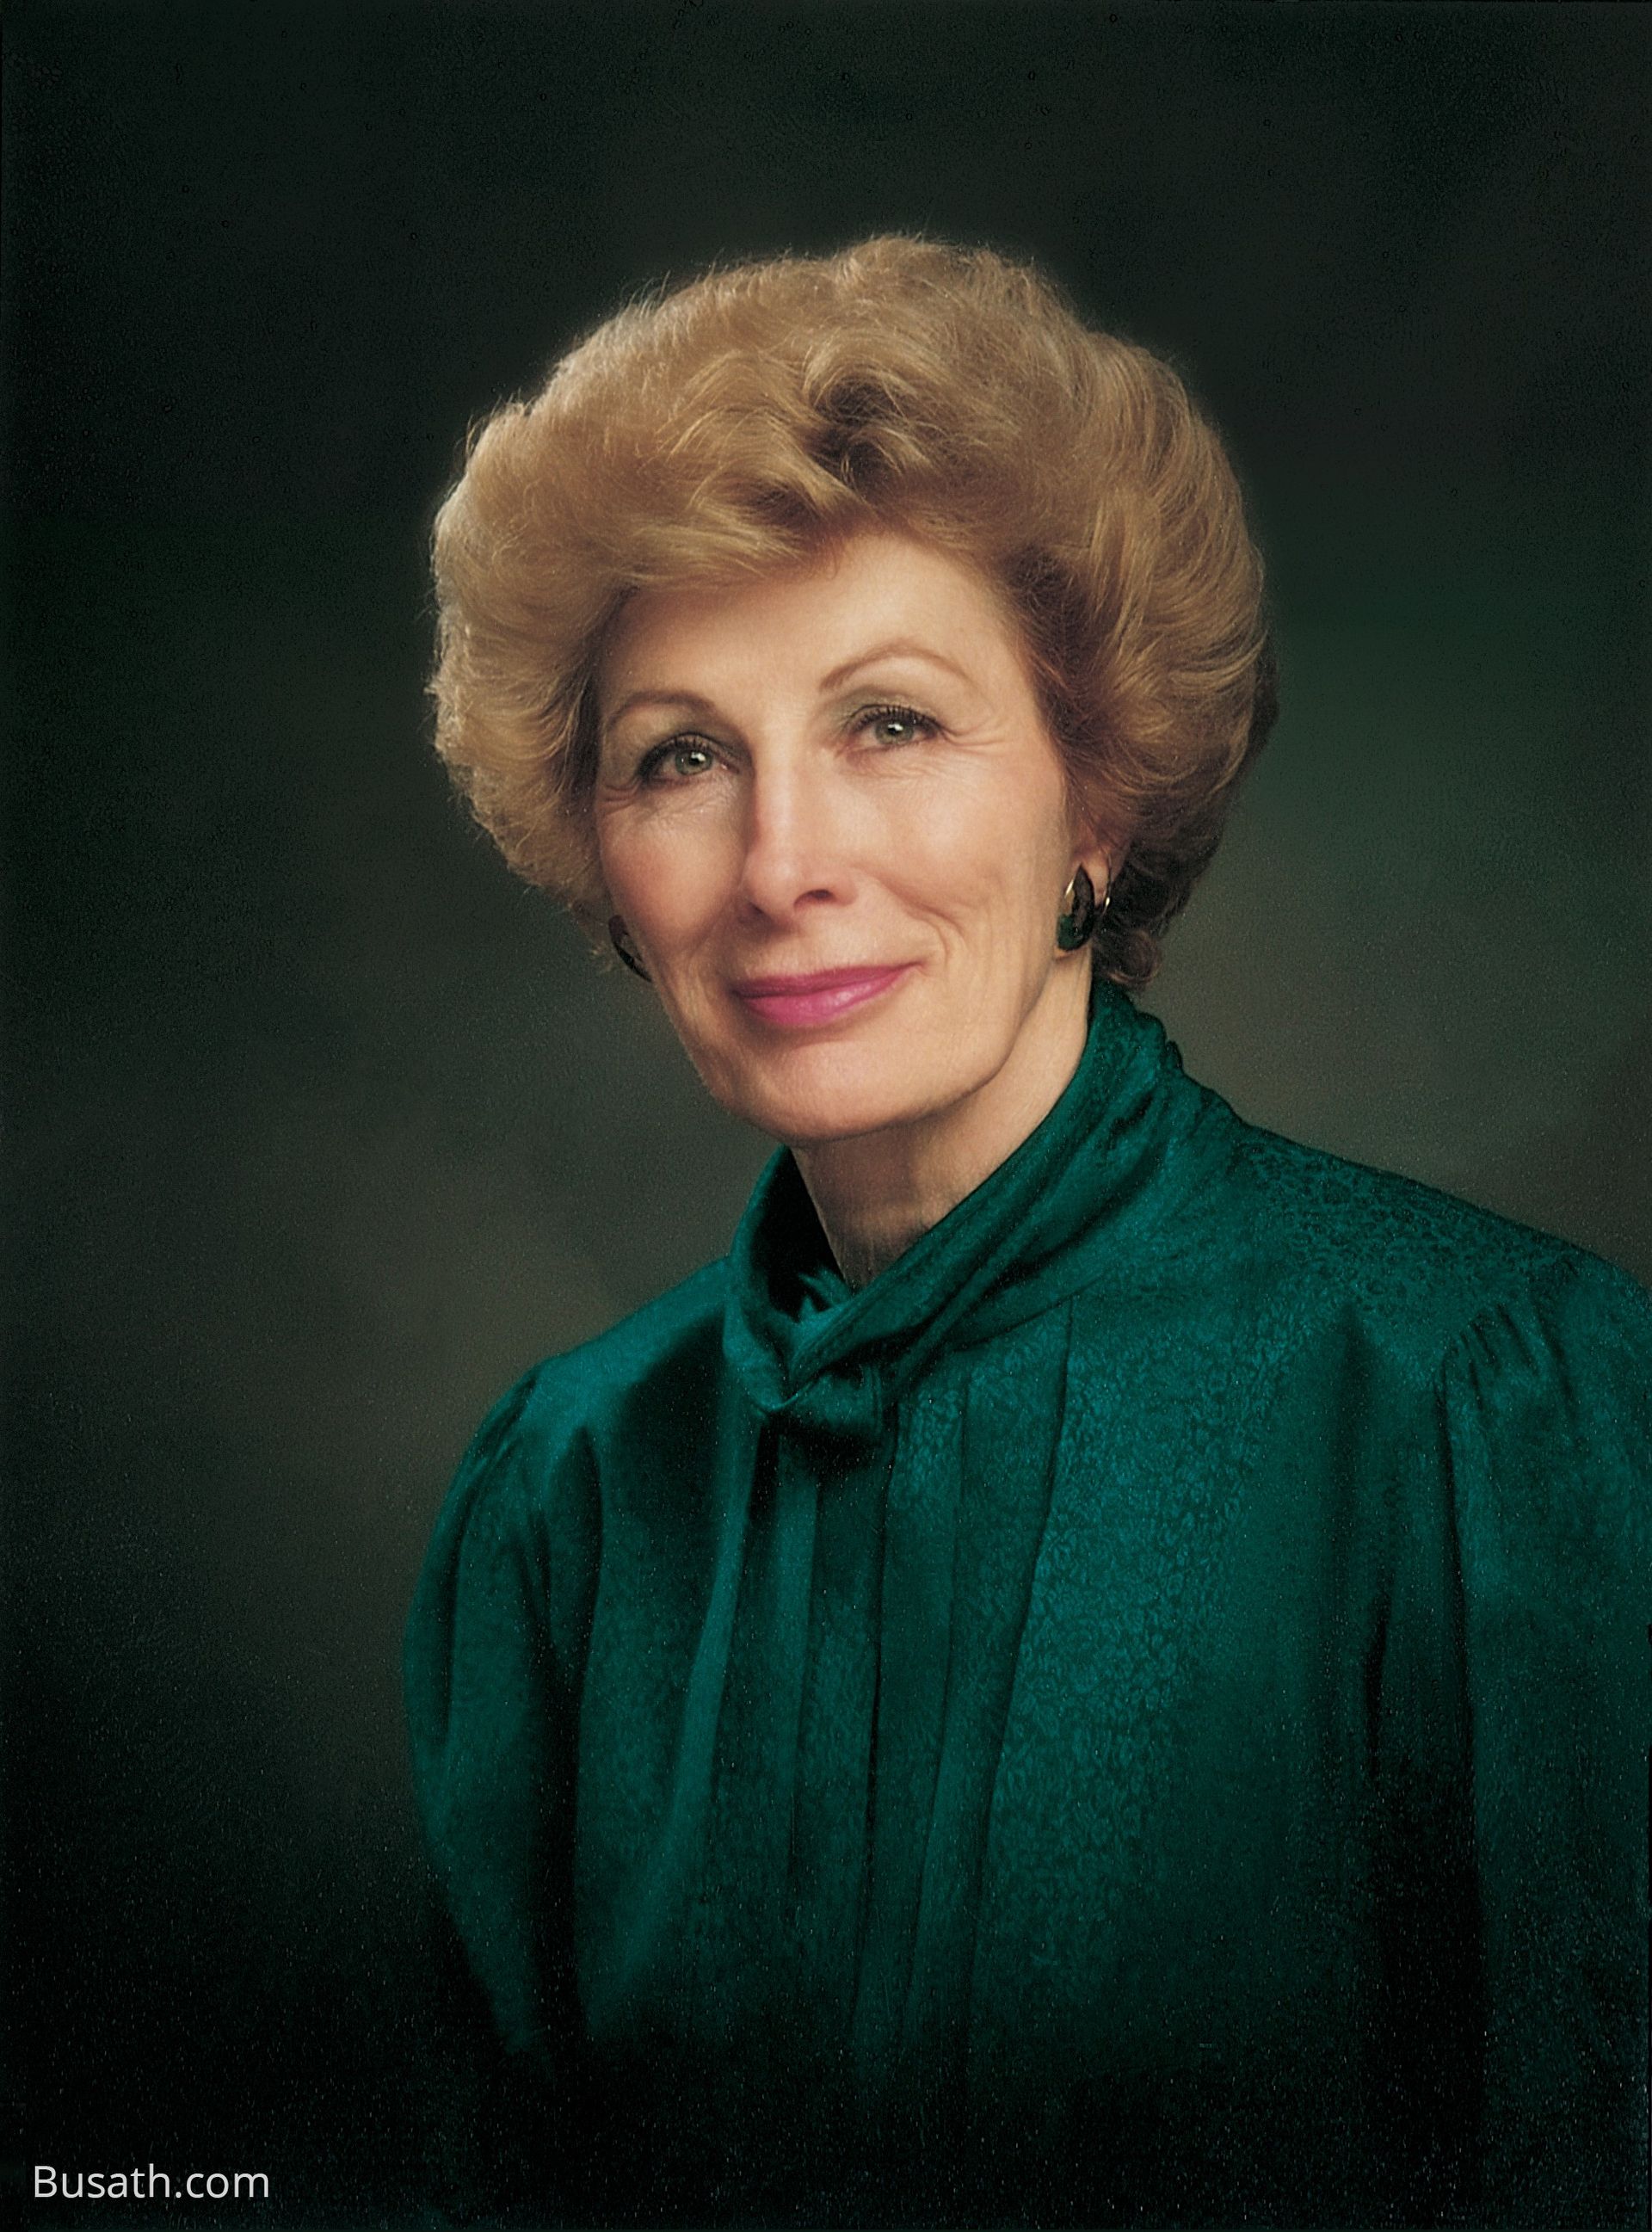 A portrait of Elaine Low Jack, who served as the 12th general president of the Relief Society from 1990 to 1997.